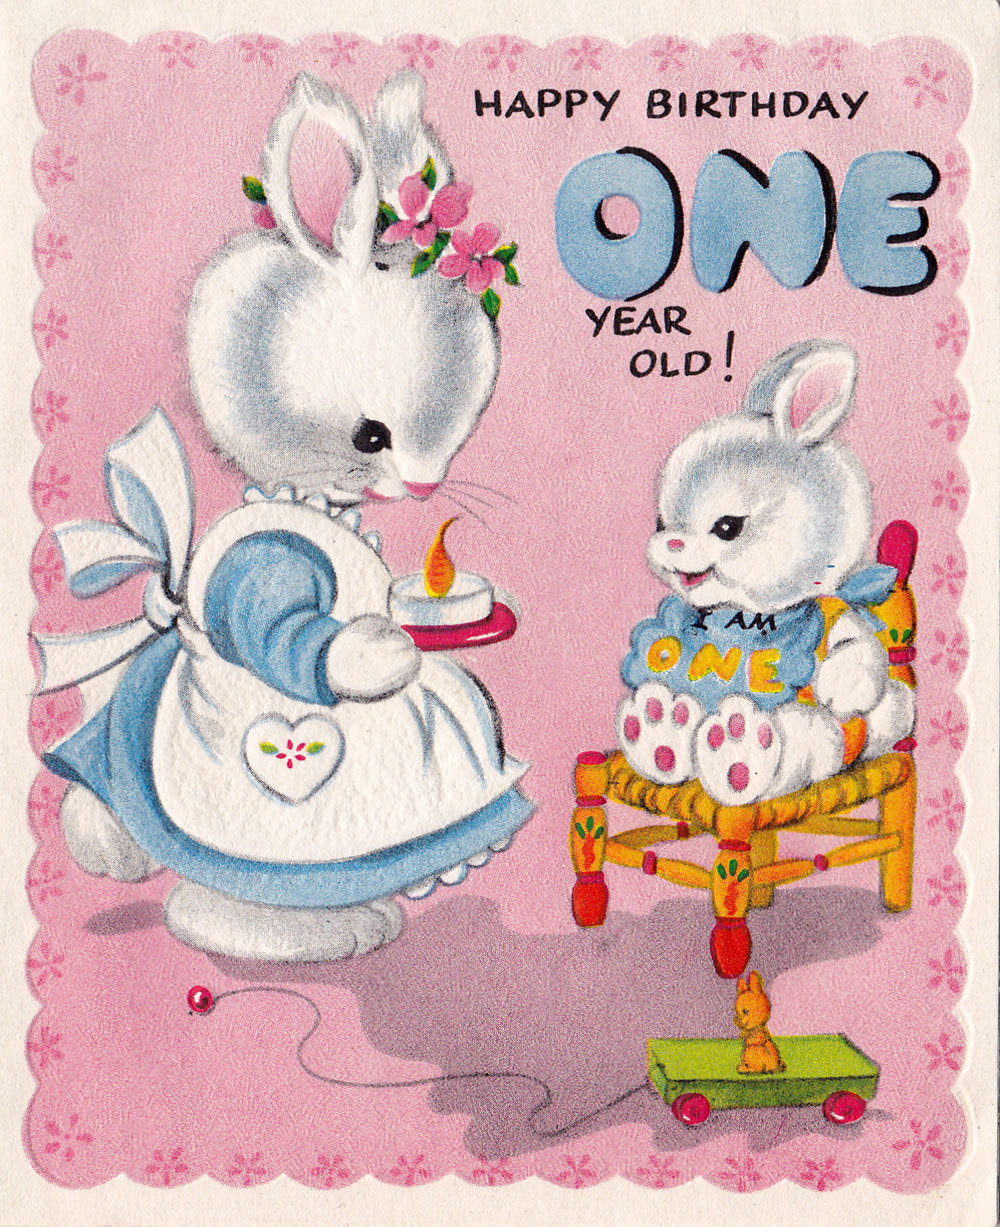 Birthday Wishes For One Year Old
 Vintage 1950s Happy Birthday 1 Year Old Greeting Card 01